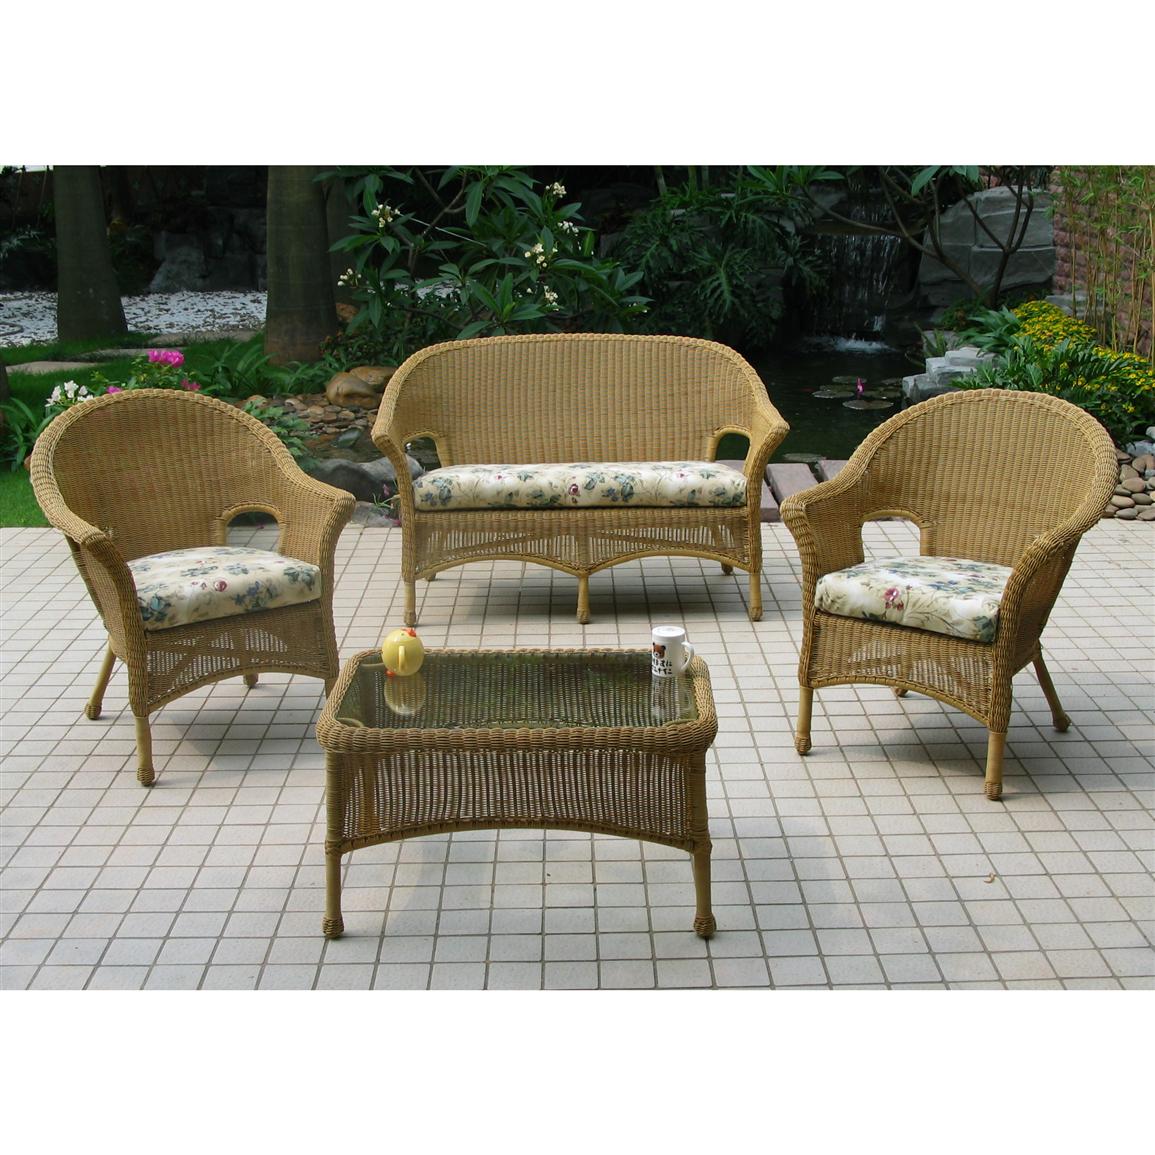 Chicago Wicker® 4  Pc. Darby Wicker Patio Furniture Collection  106161, Patio Furniture at 